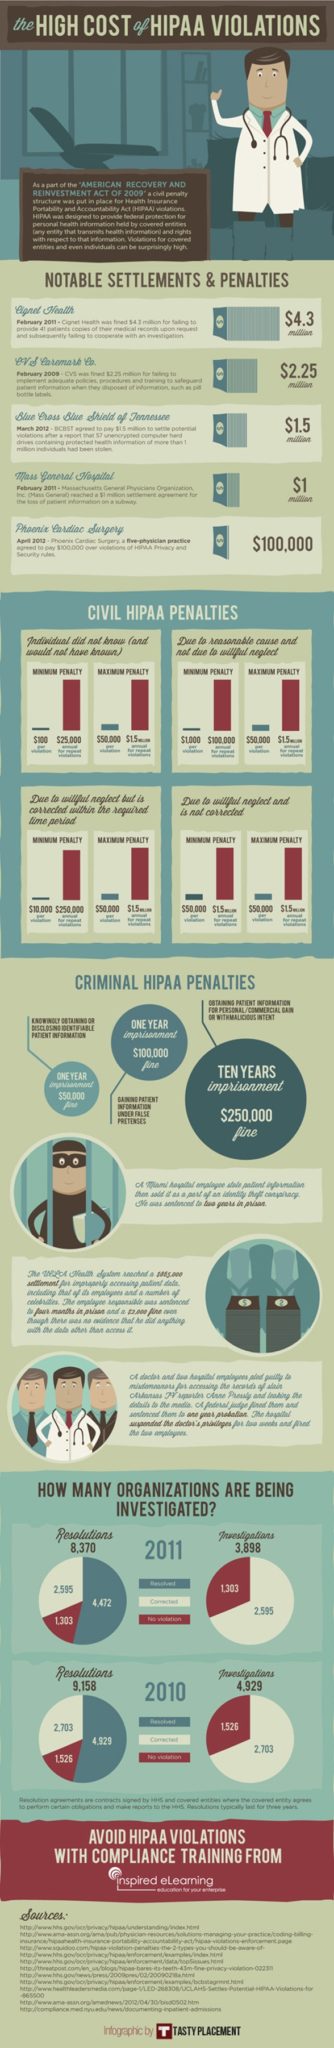 HIPAA-infographic-reduced